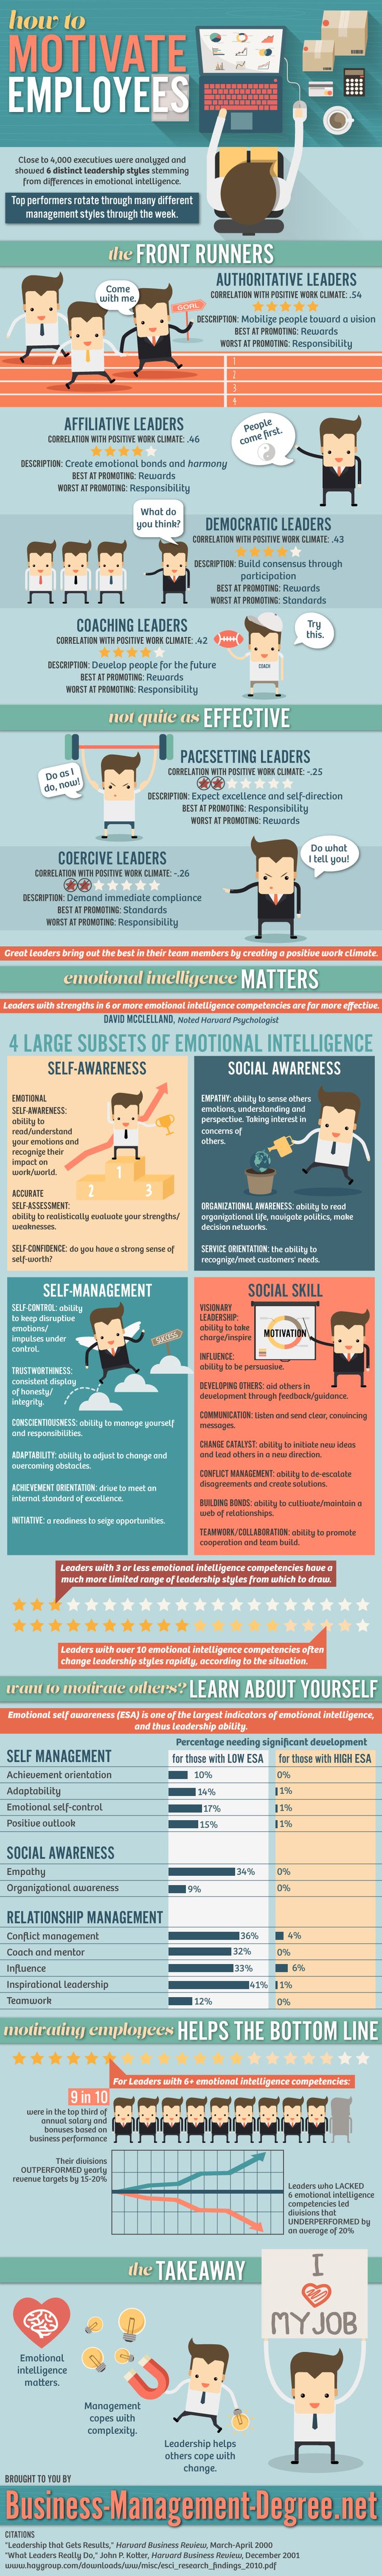 Management How to Motivate Employees [Infographic